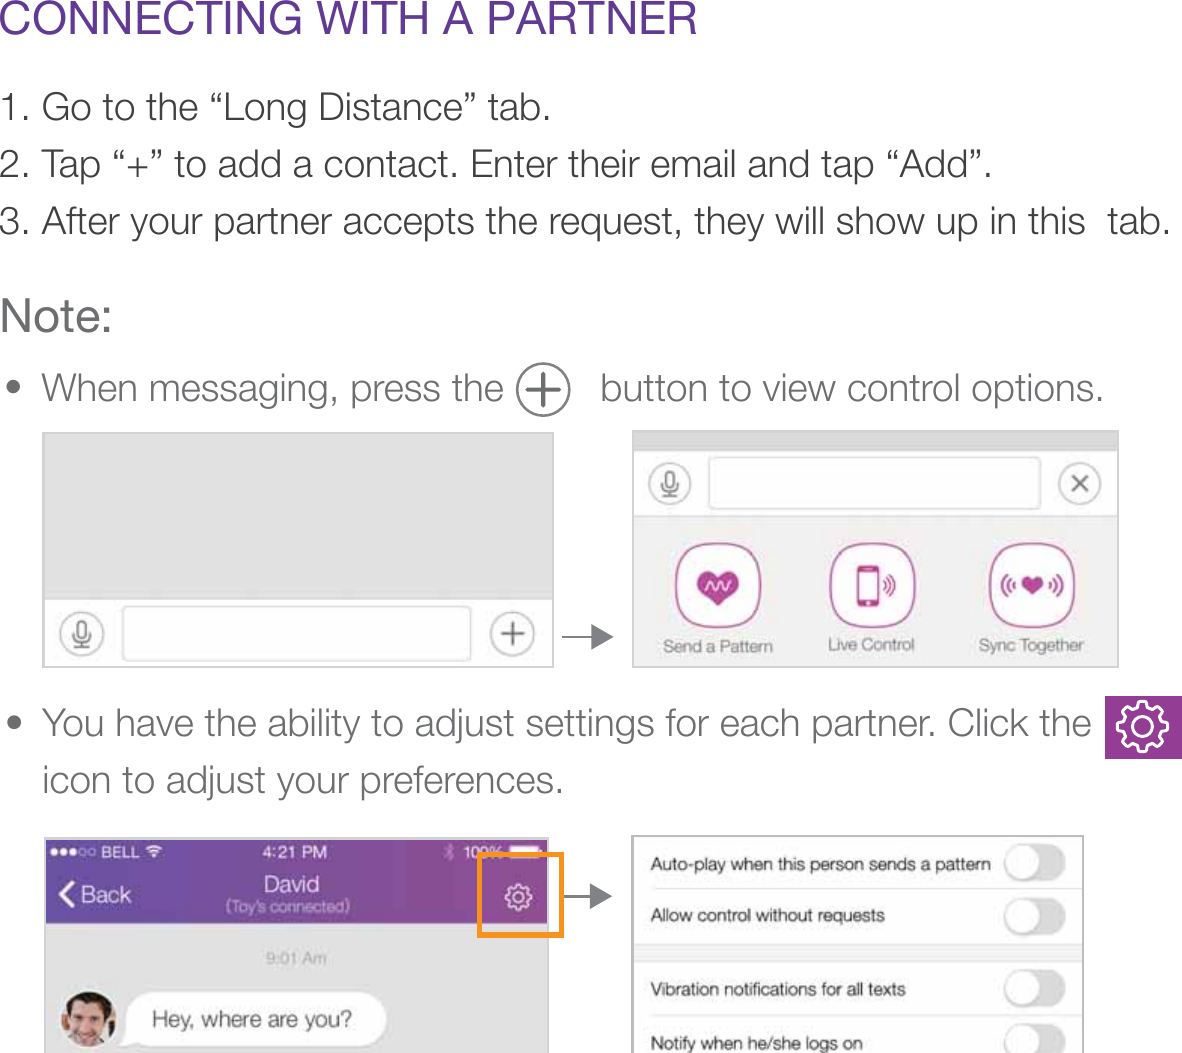 CONNECTING WITH A PARTNER1. Go to the “Long Distance” tab. 2. Tap “+” to add a contact. Enter their email and tap “Add”. 3. After your partner accepts the request, they will show up in this  tab.Note:When messaging, press the         button to view control options.• You have the ability to adjust settings for each partner. Click the          icon to adjust your preferences. • 